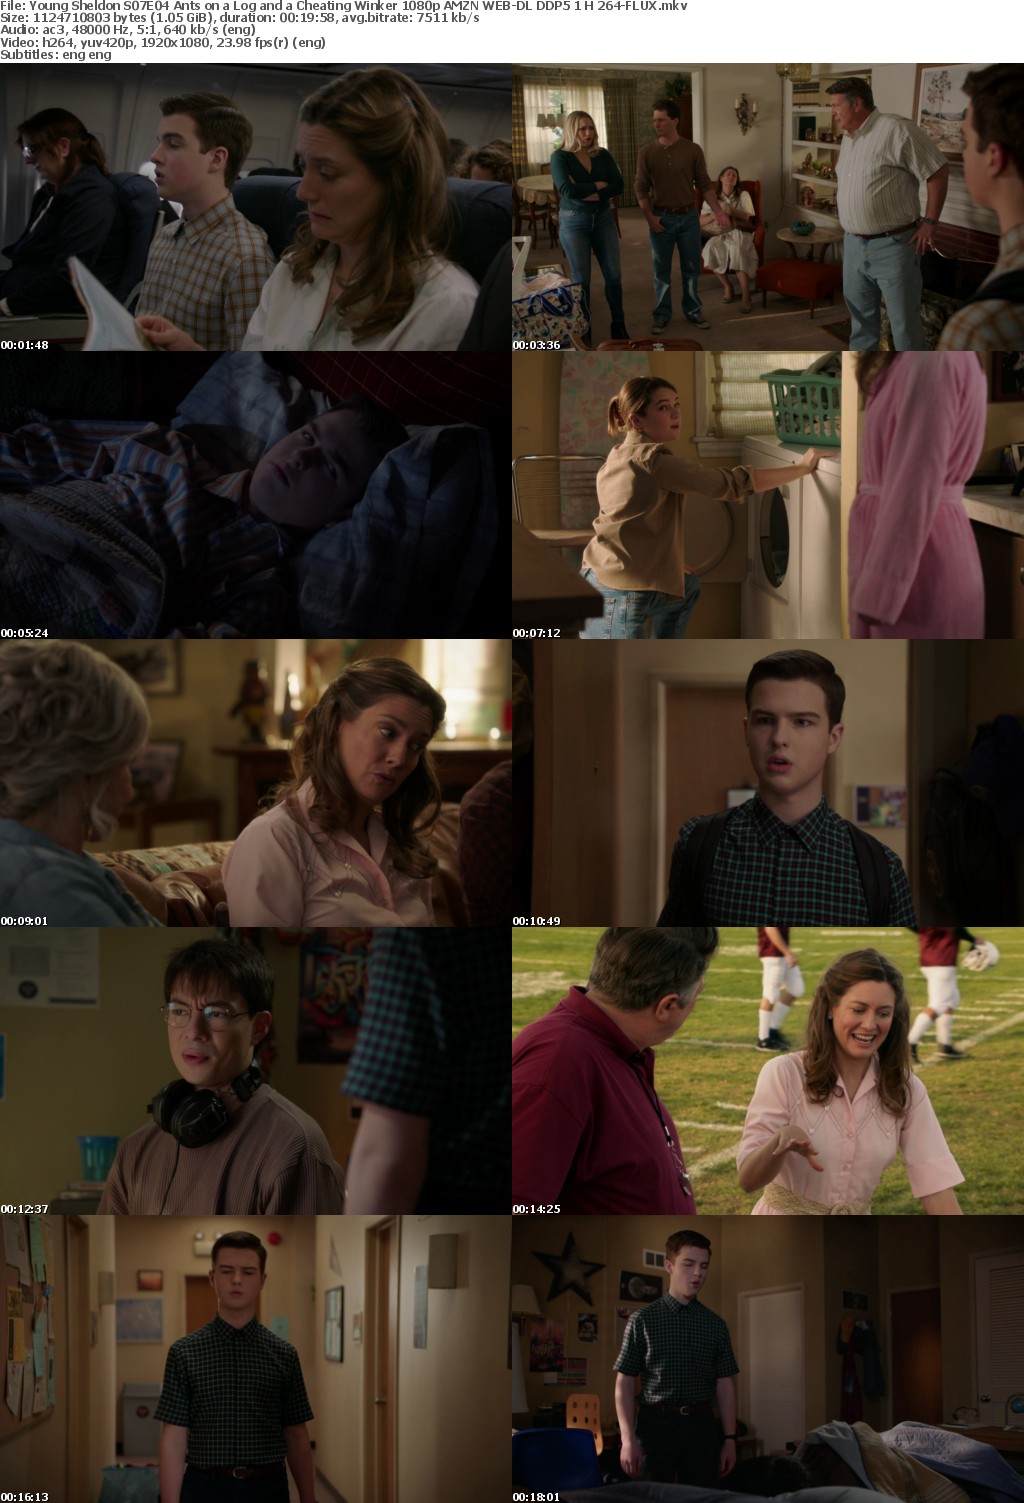 Young Sheldon S07E04 Ants on a Log and a Cheating Winker 1080p AMZN WEB-DL DDP5 1 H 264-FLUX